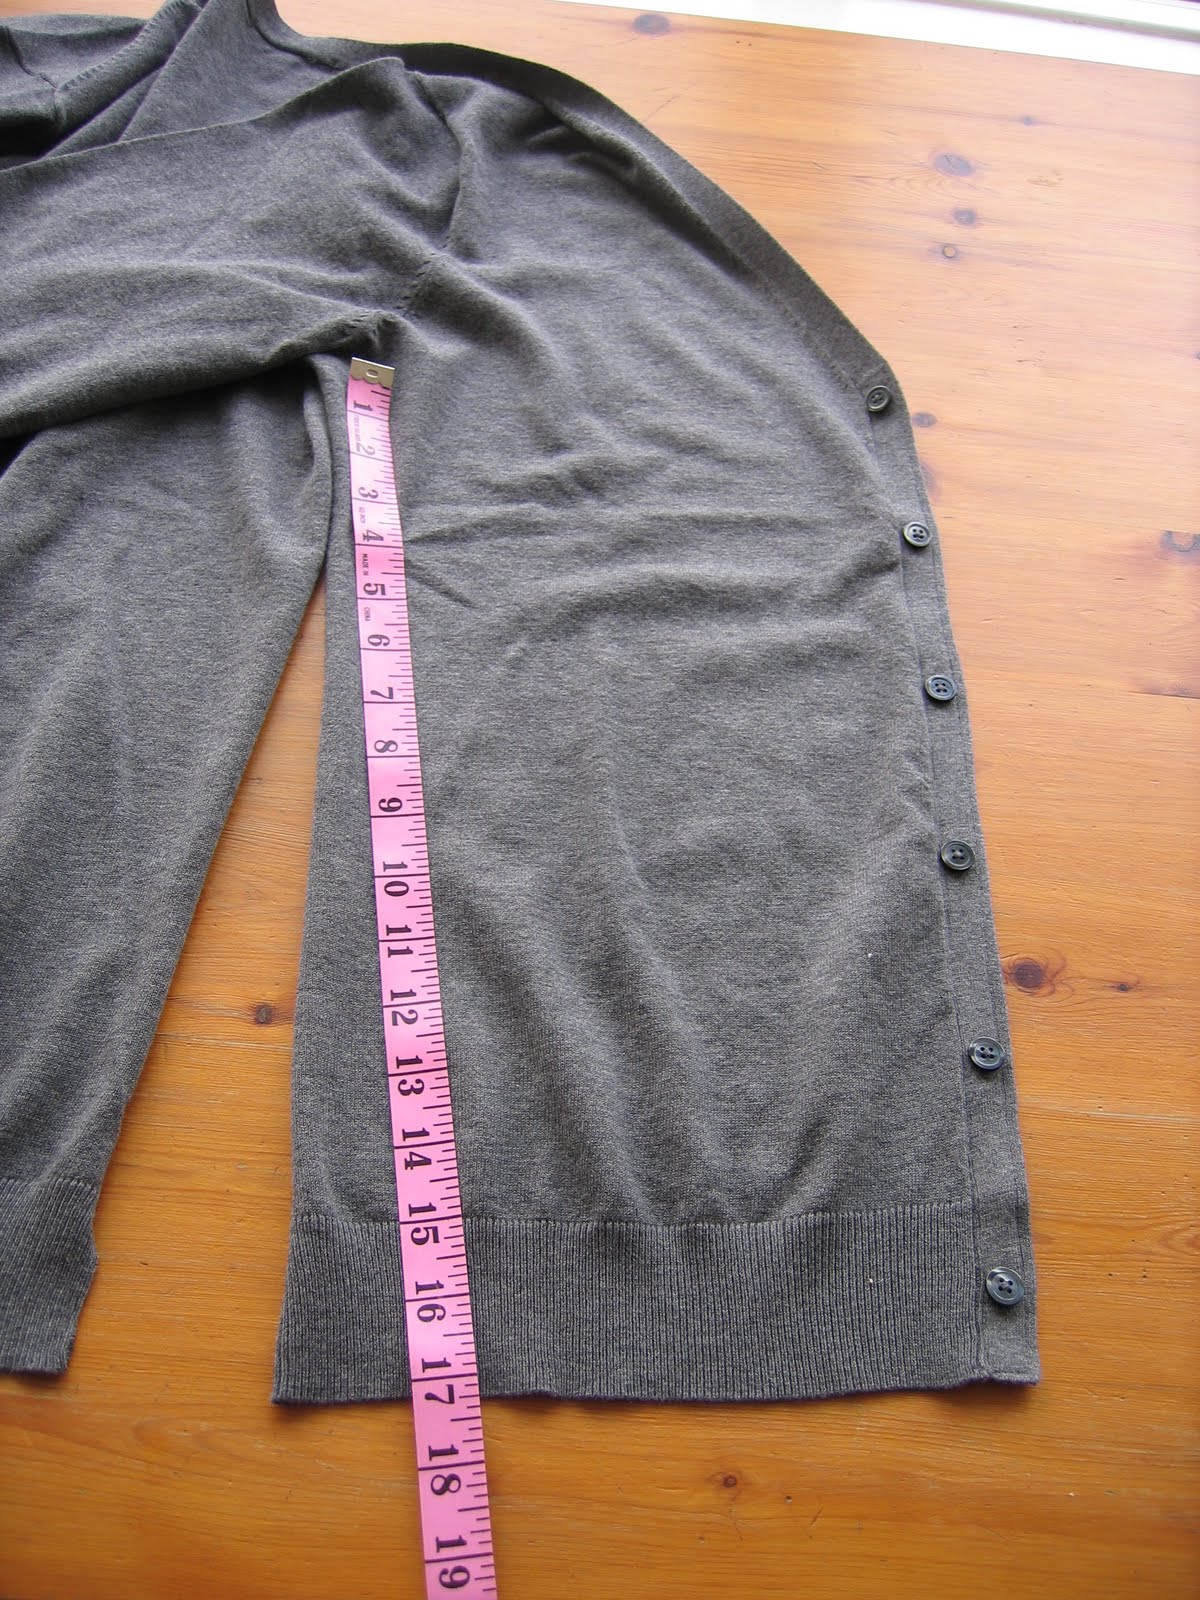 Seamless: Tutorial 12a - Part 1 Sleeveless Cardigan with Draped Sides